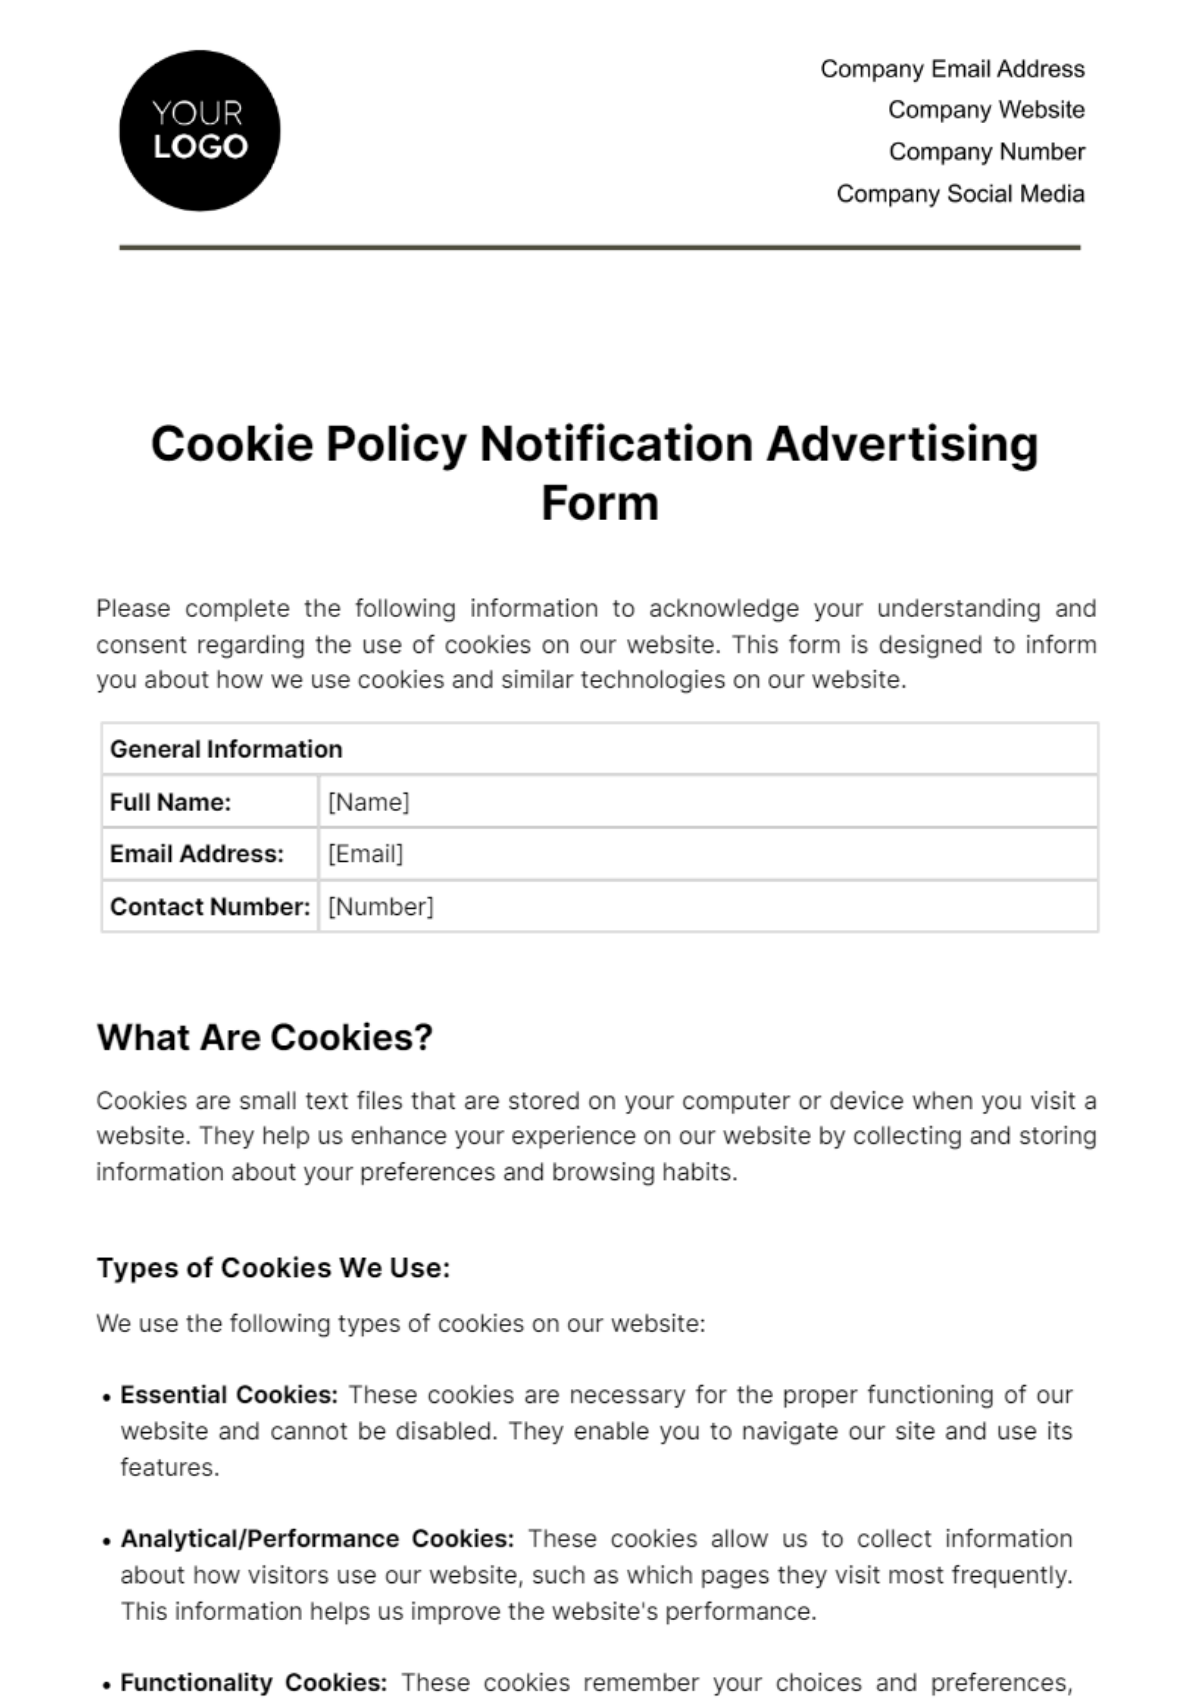 Free Cookie Policy Notification Advertising Form Template